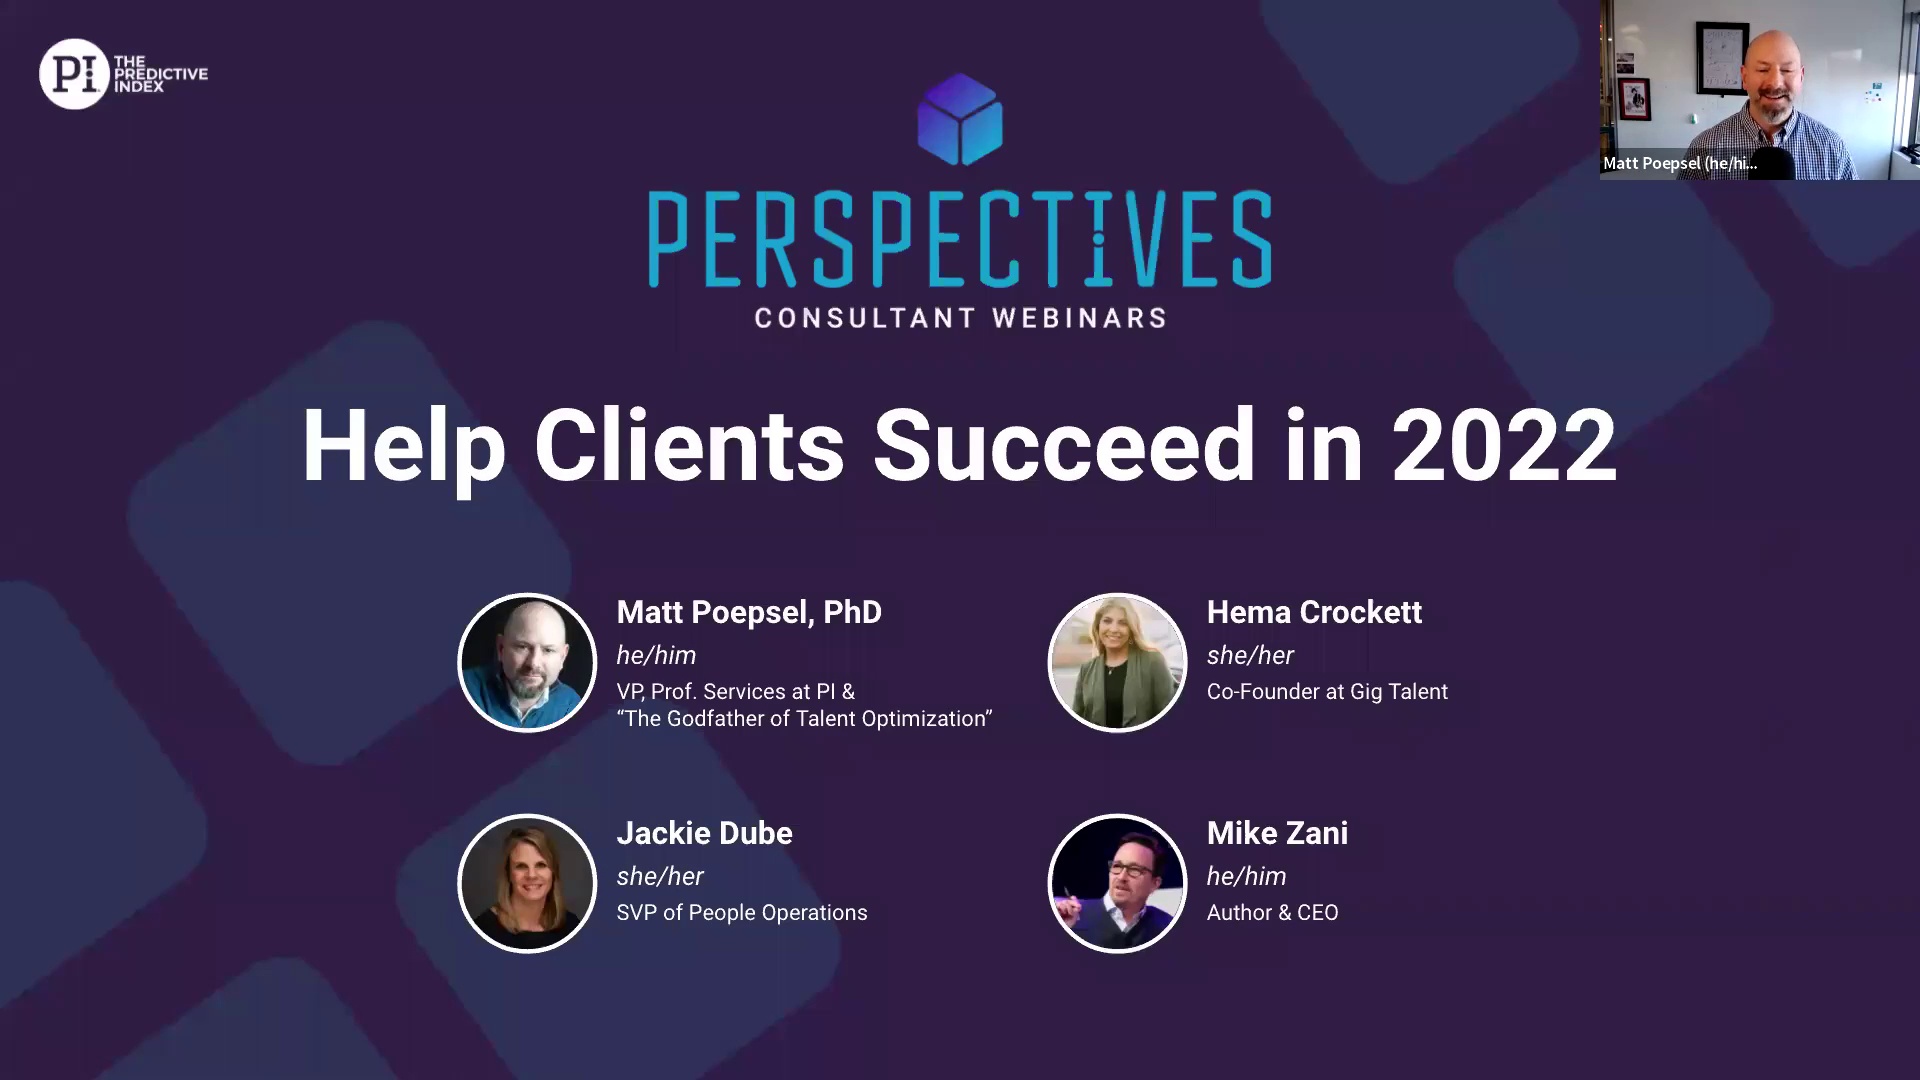 Perspectives - Help Clients Succeed in 2022